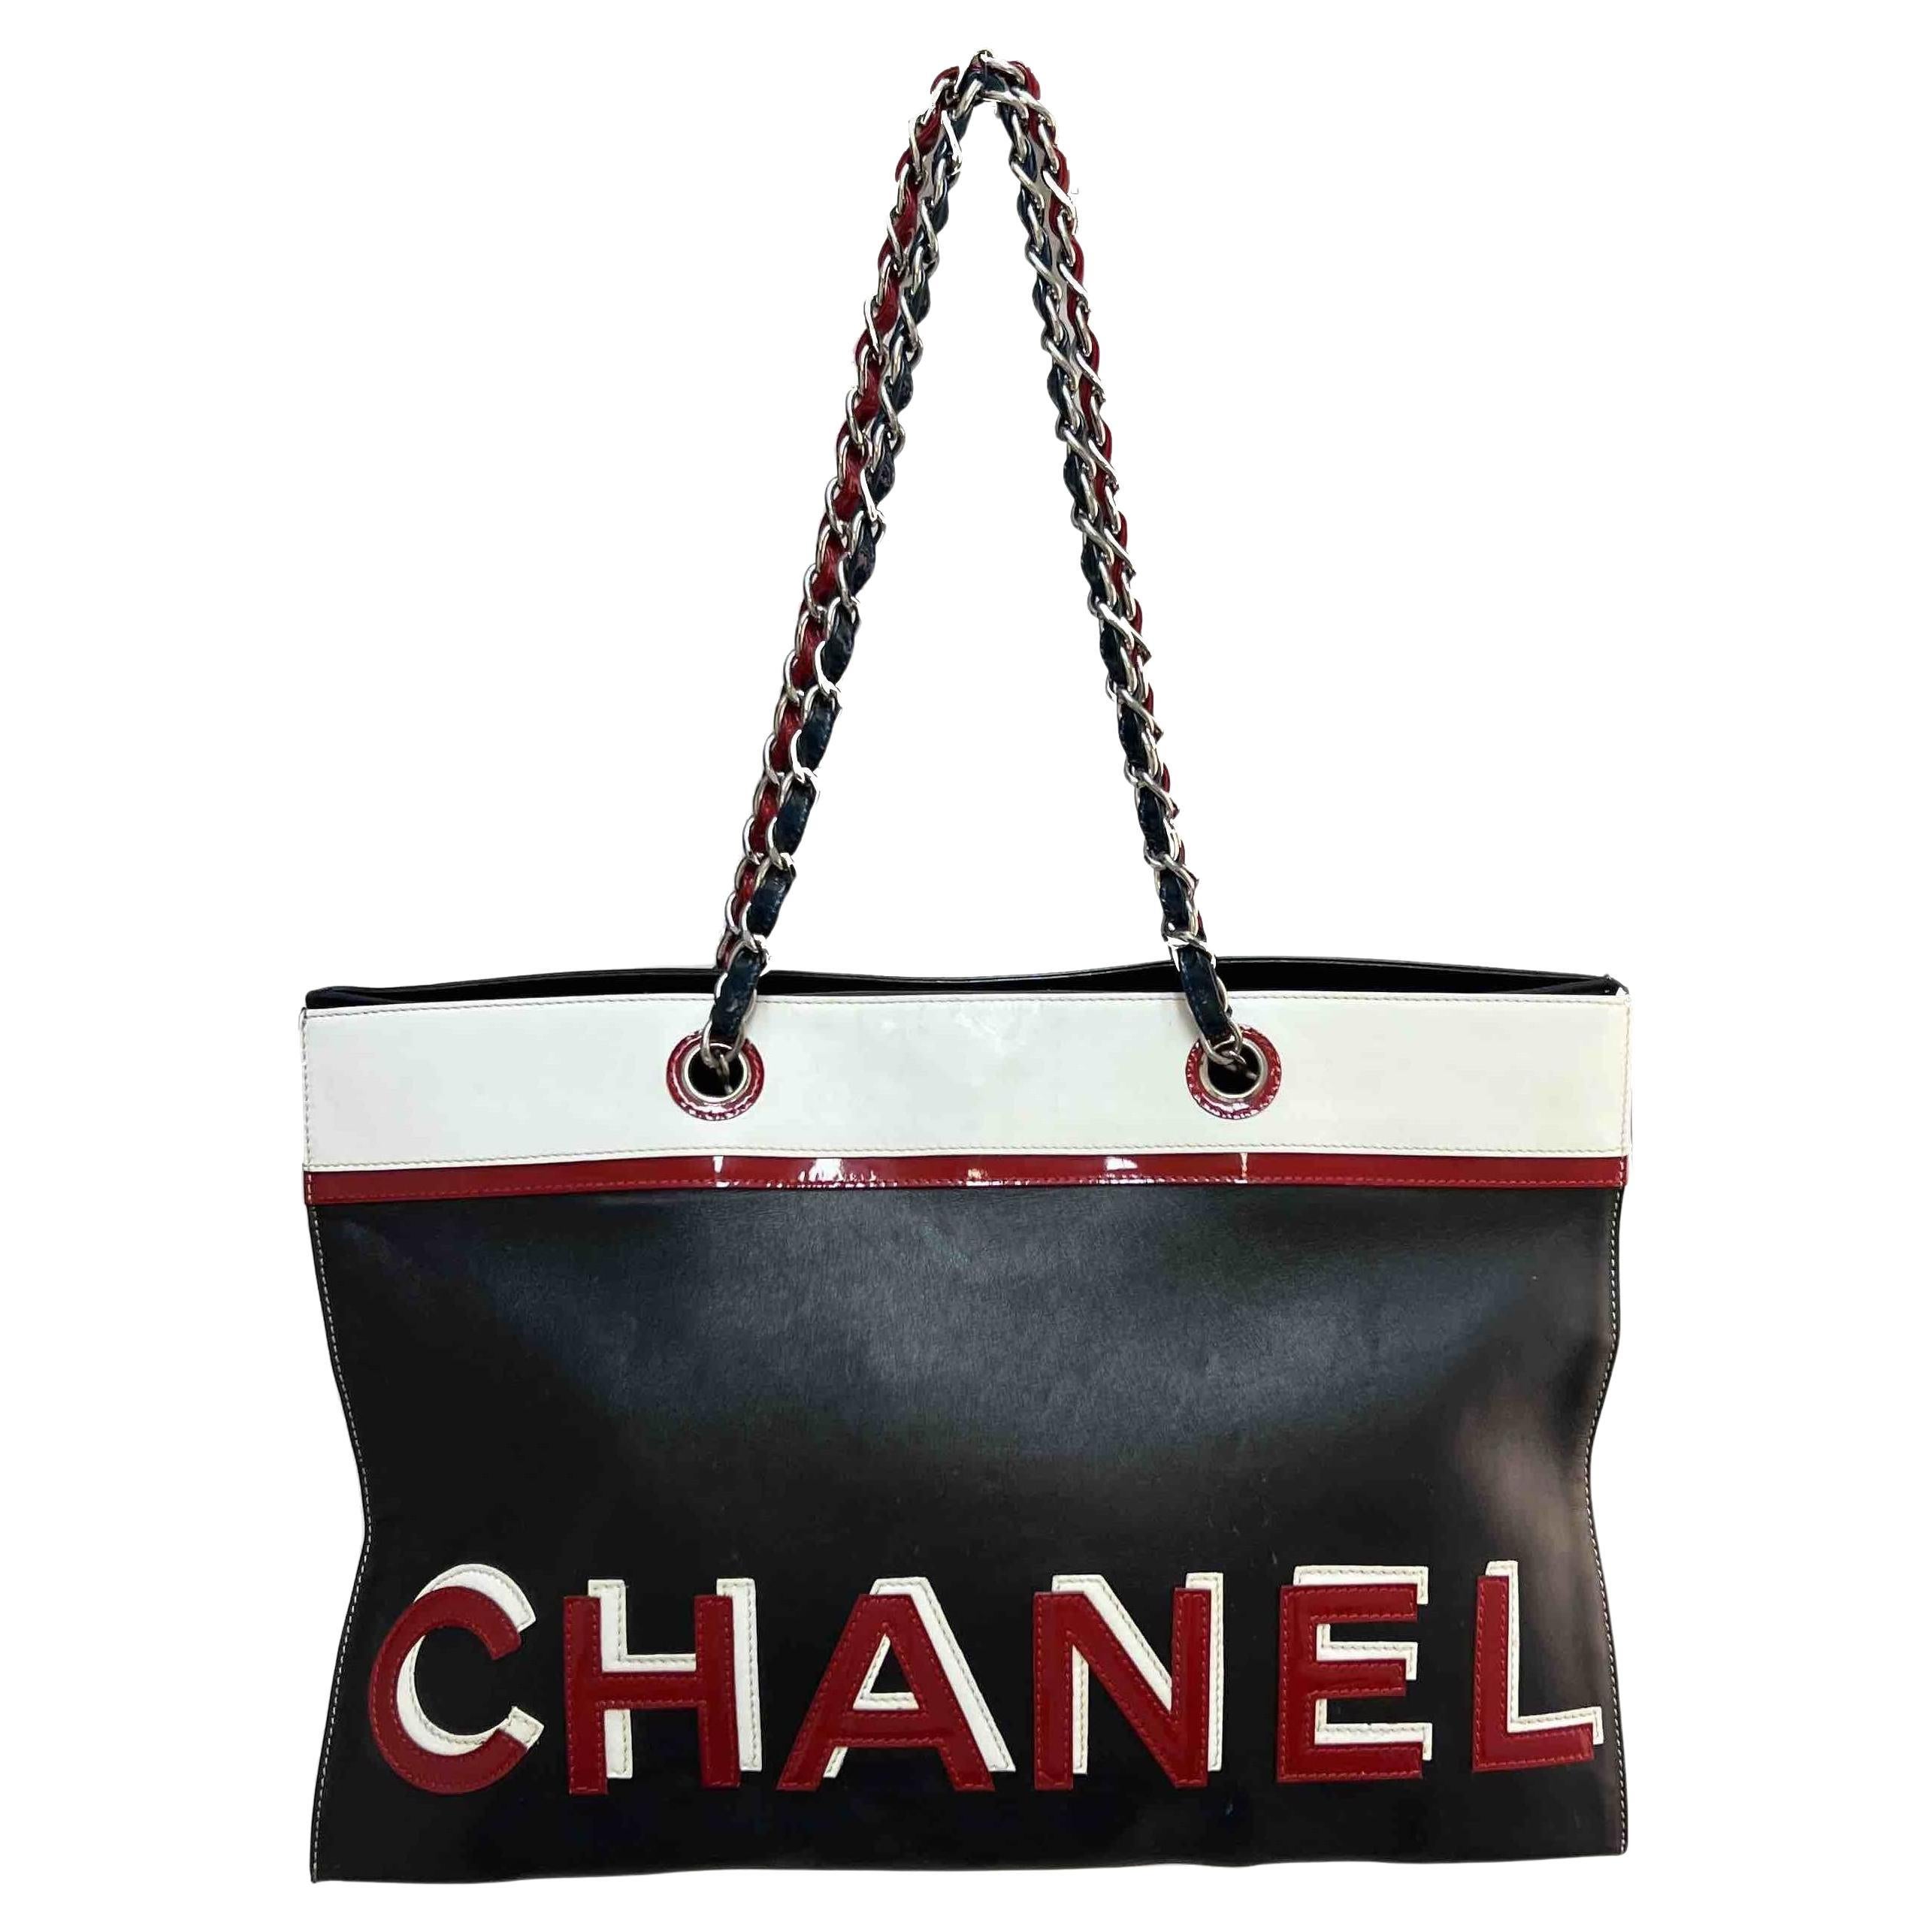 CHANEL Vintage Tote Bag in Leather